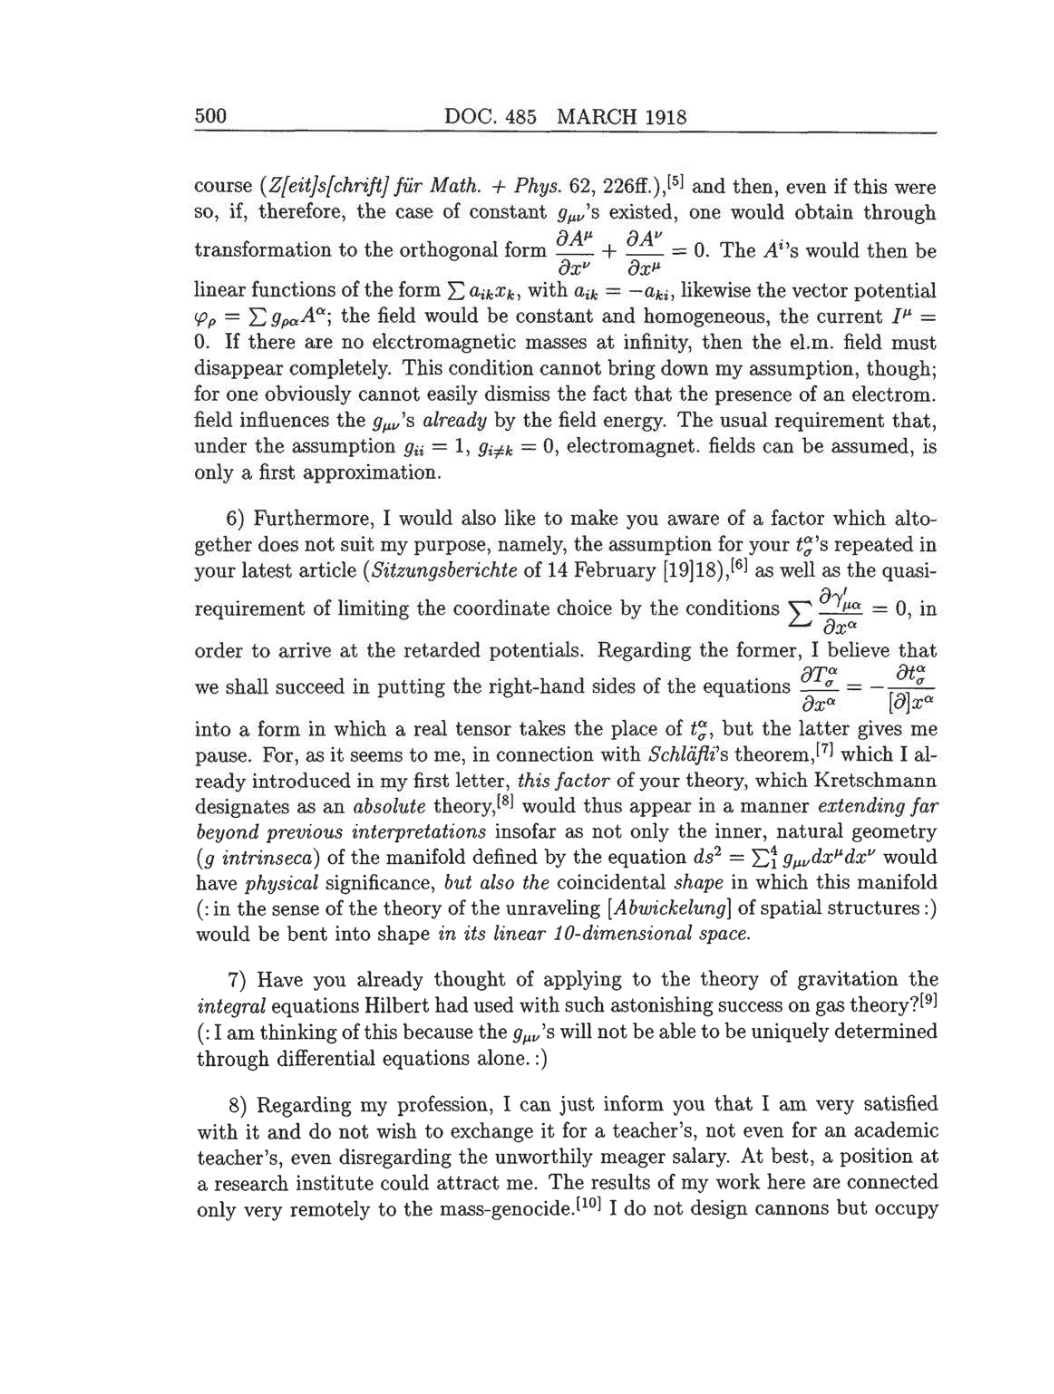 Volume 8: The Berlin Years: Correspondence, 1914-1918 (English translation supplement) page 500